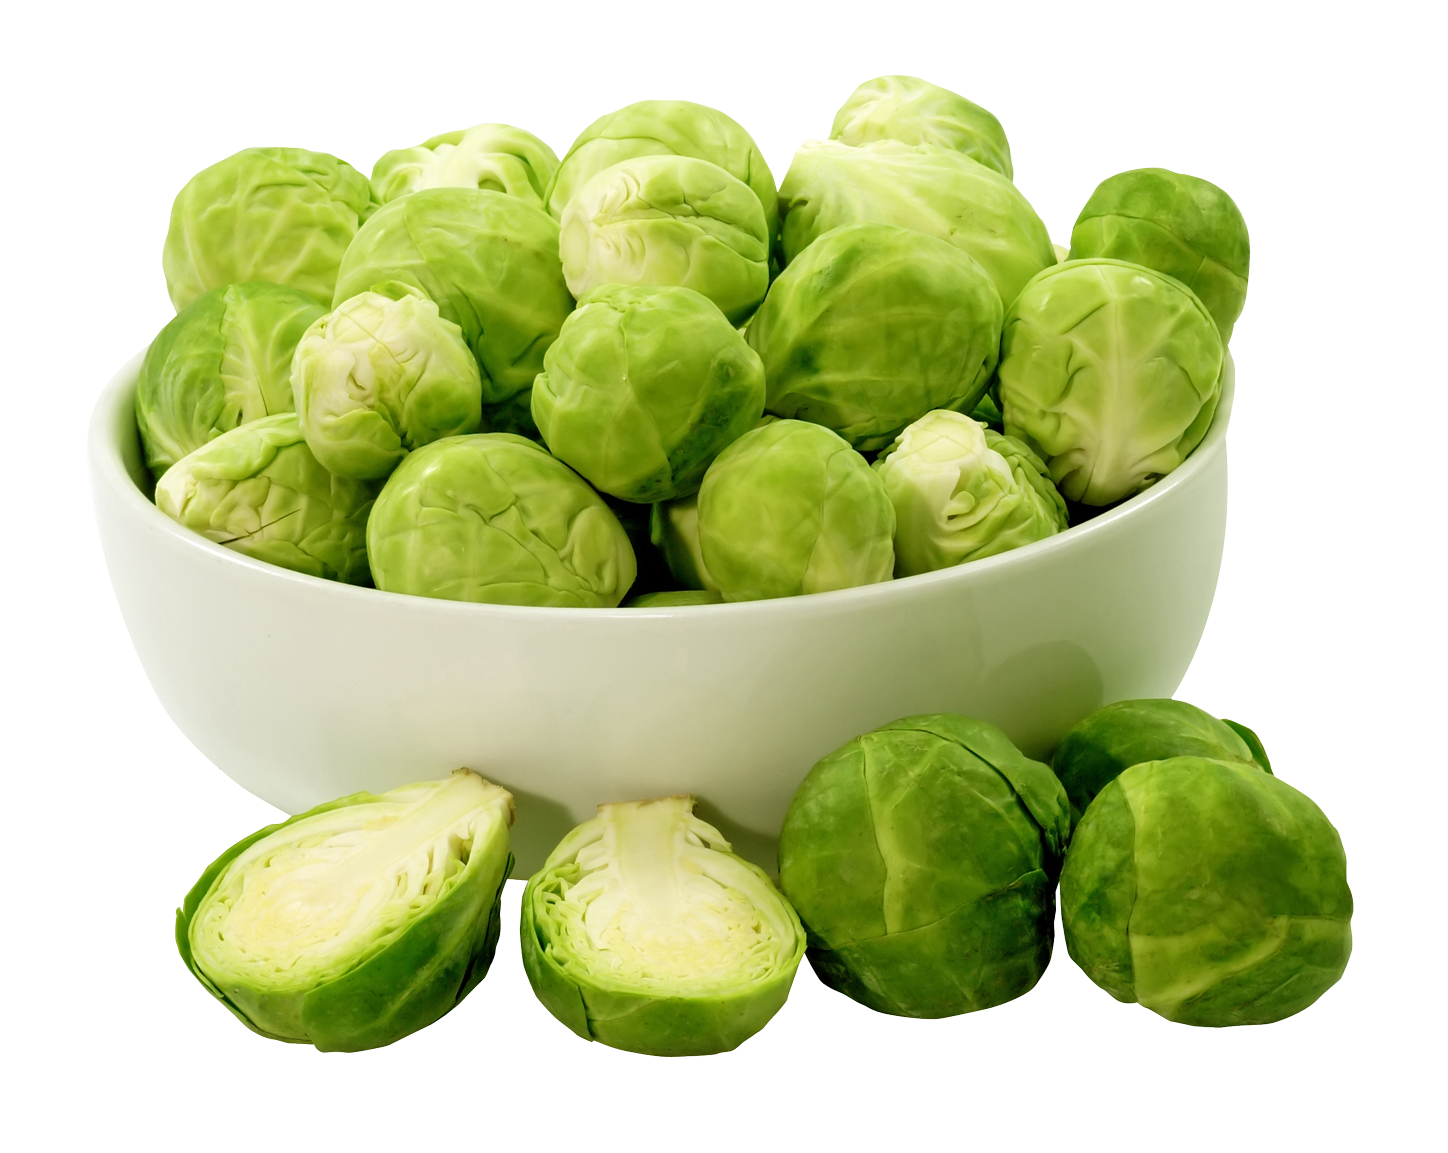 Brussel Sprout Transparent Image